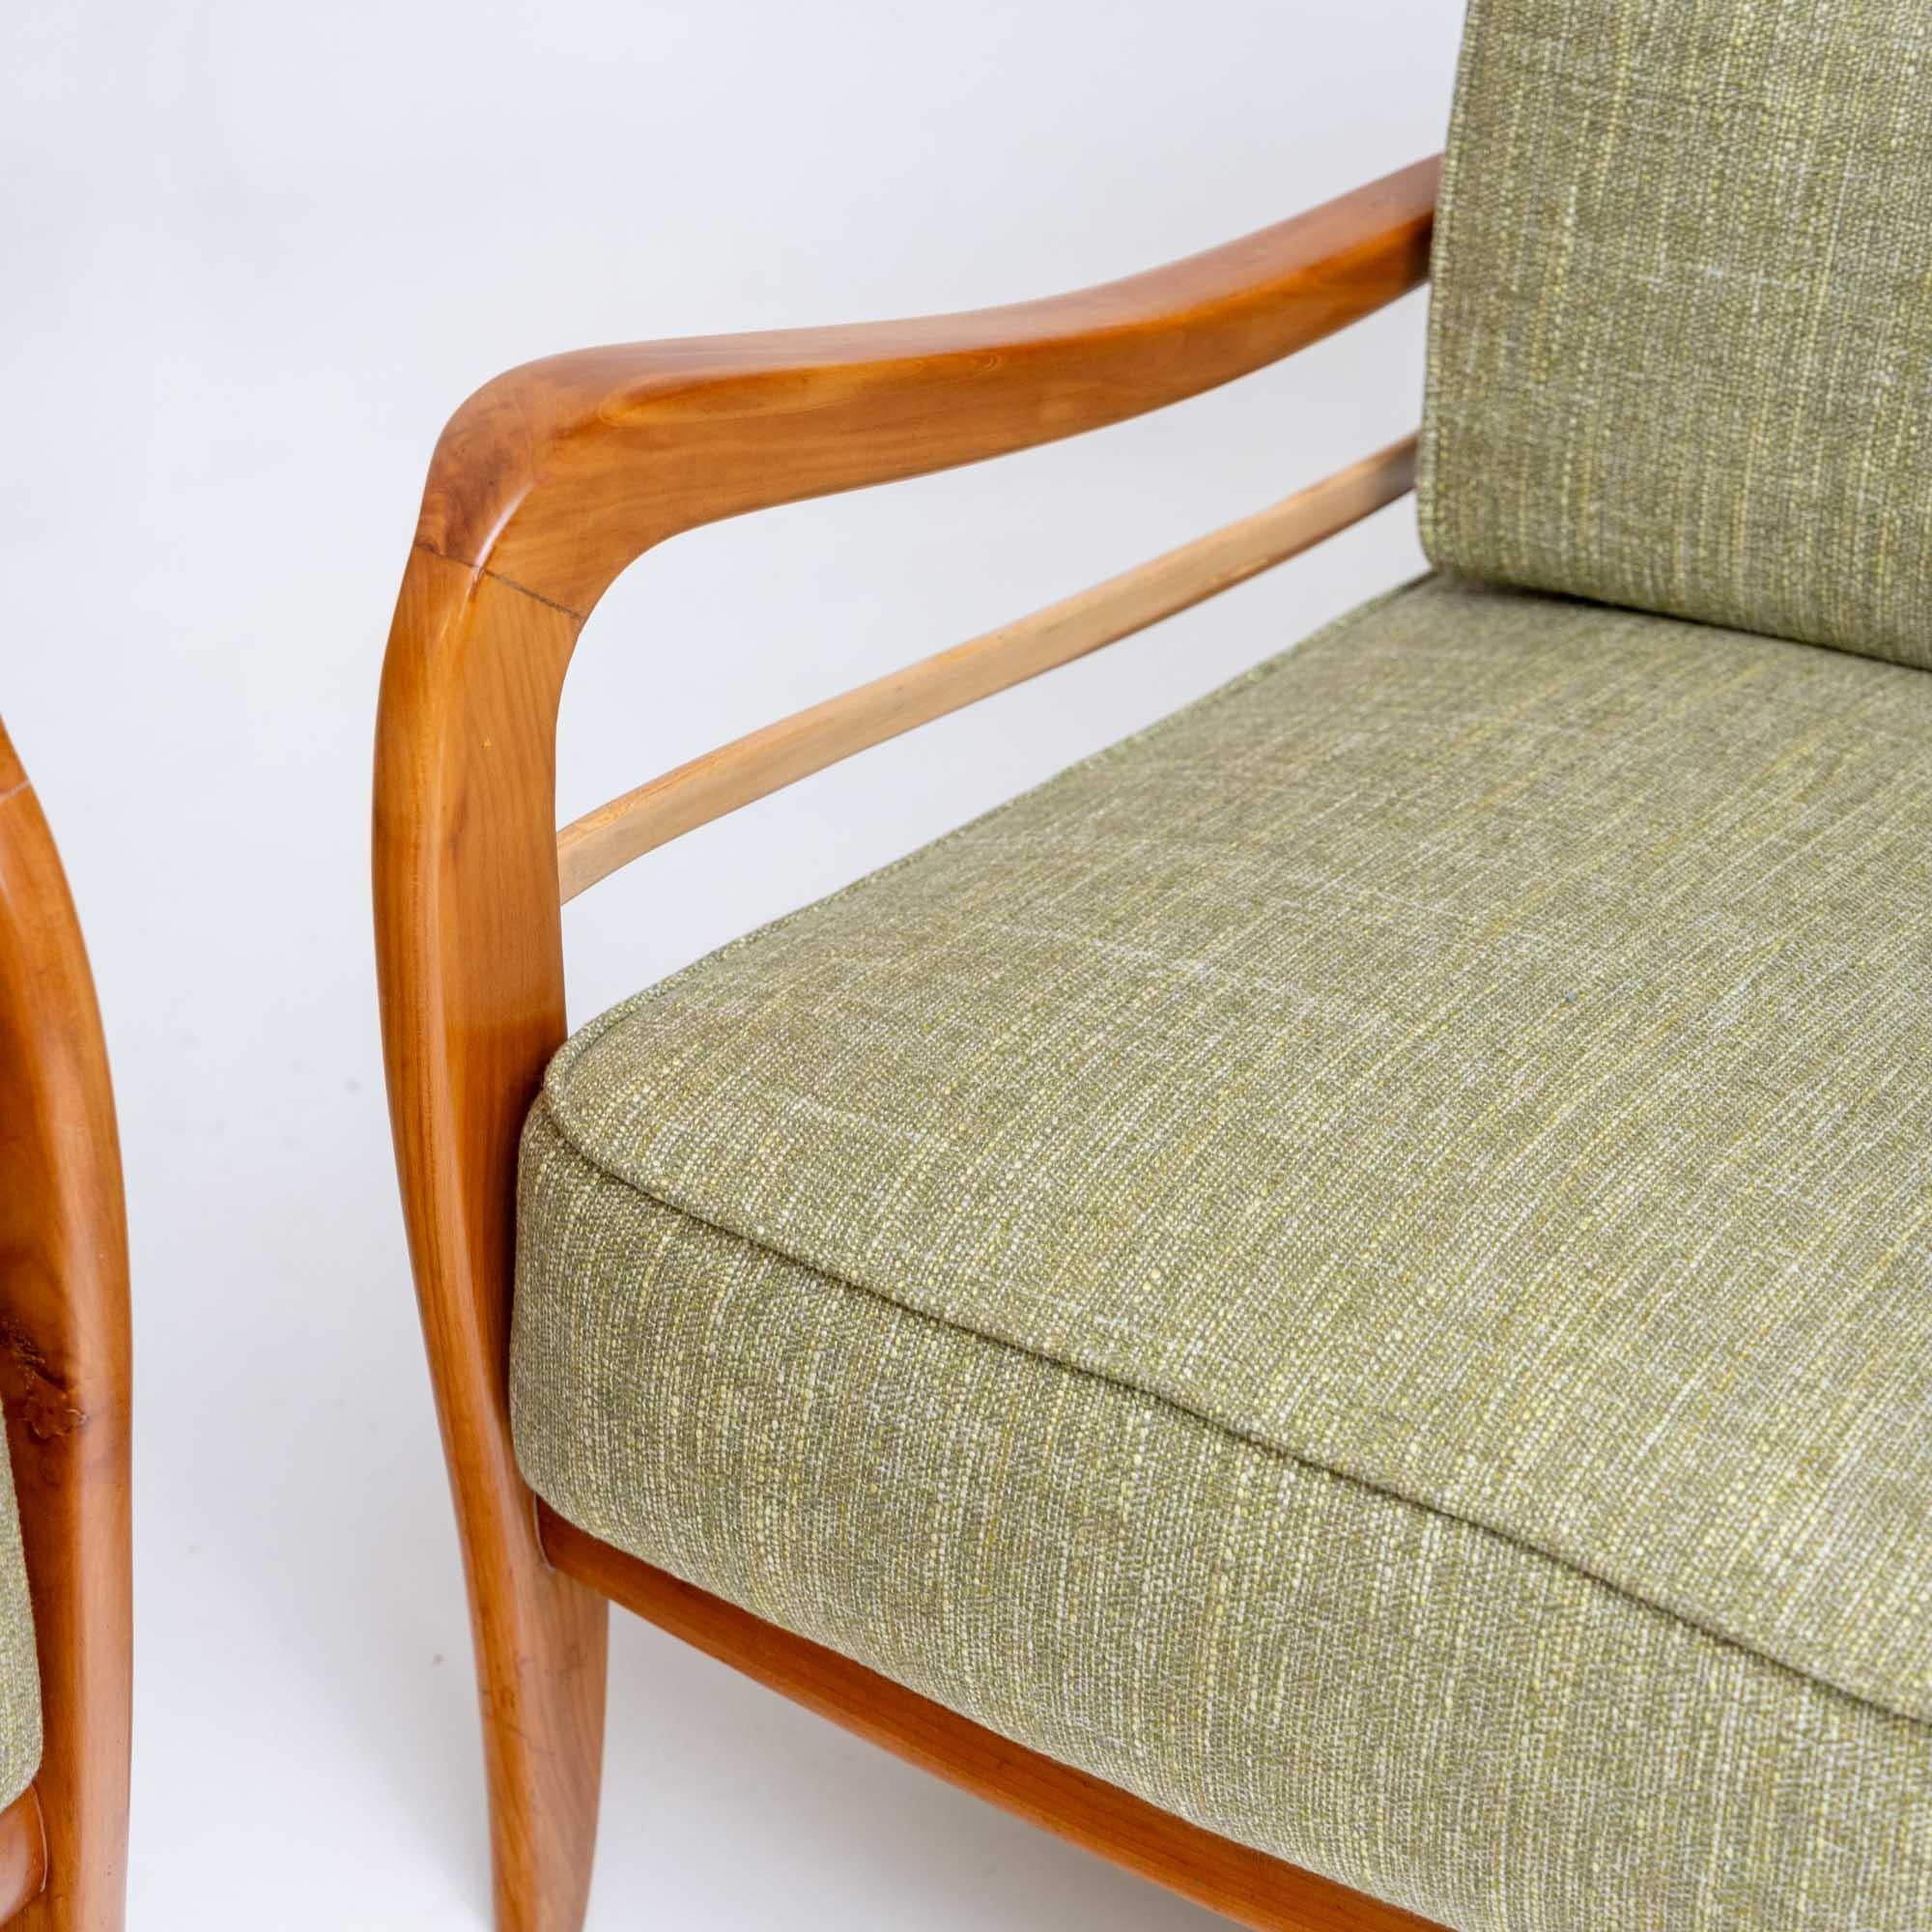 Fabric Pair of Lounge Chairs in Cherry, green Upholstery attr. Paolo Buffa, Italy 1950s